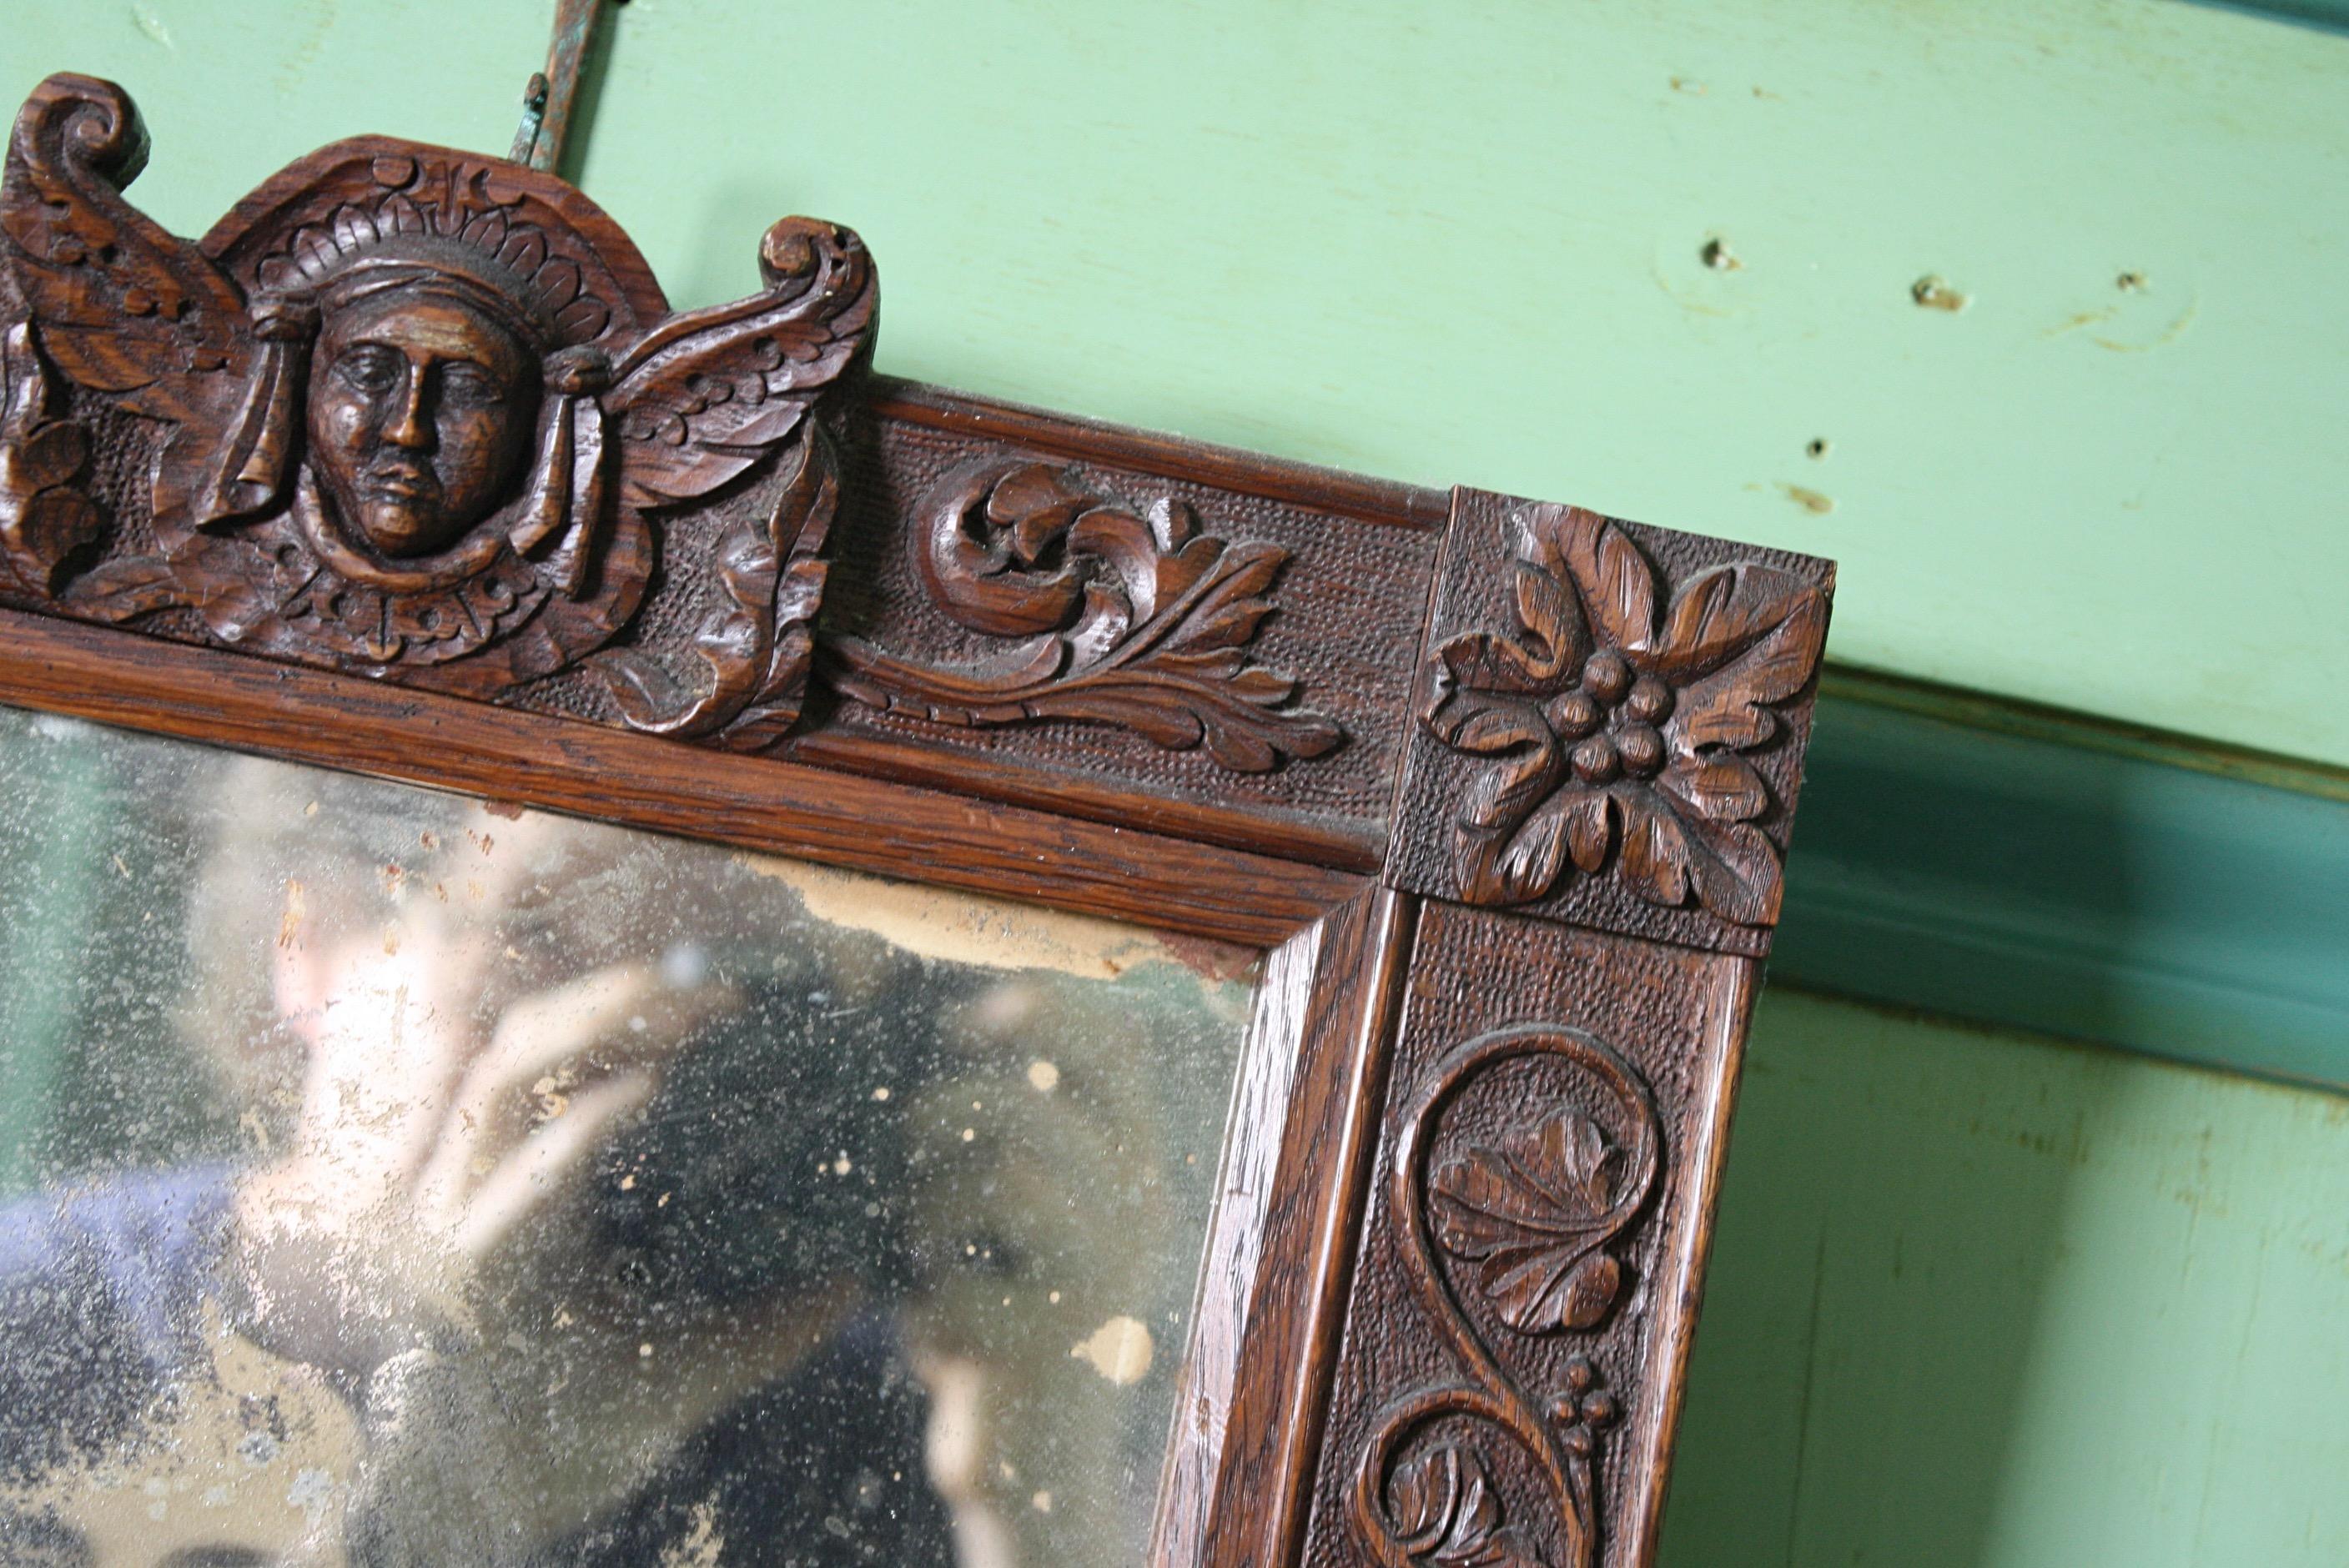 Early 20th Century Memento Mori Reminder Curiosity Face in the Mirror 5